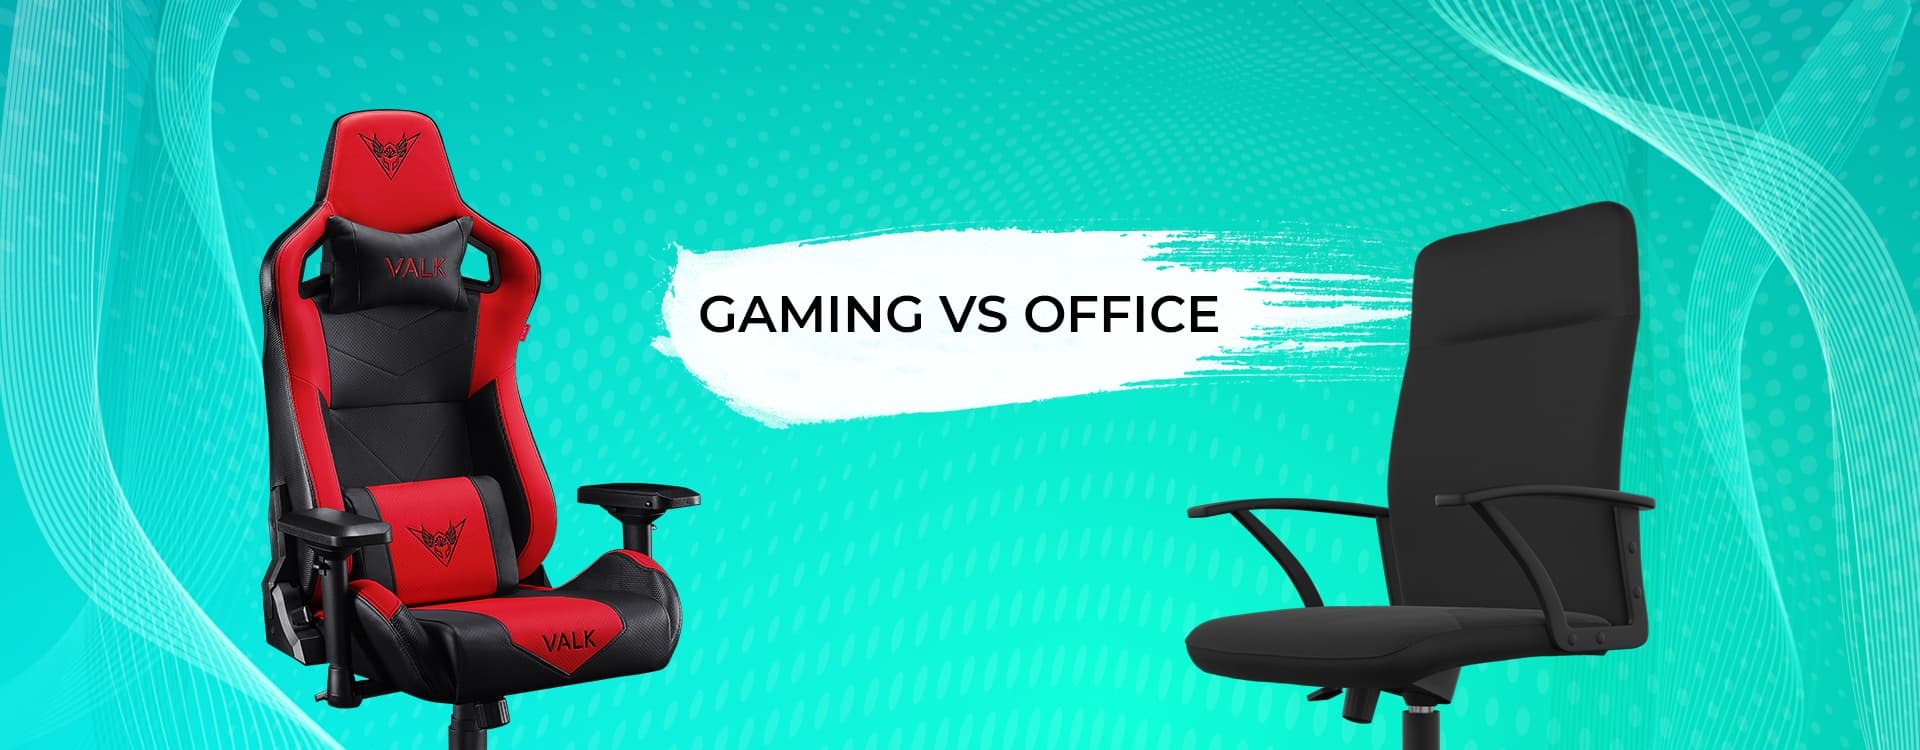 Gaming chairs vs. office chairs: which is the best choice for work and play?